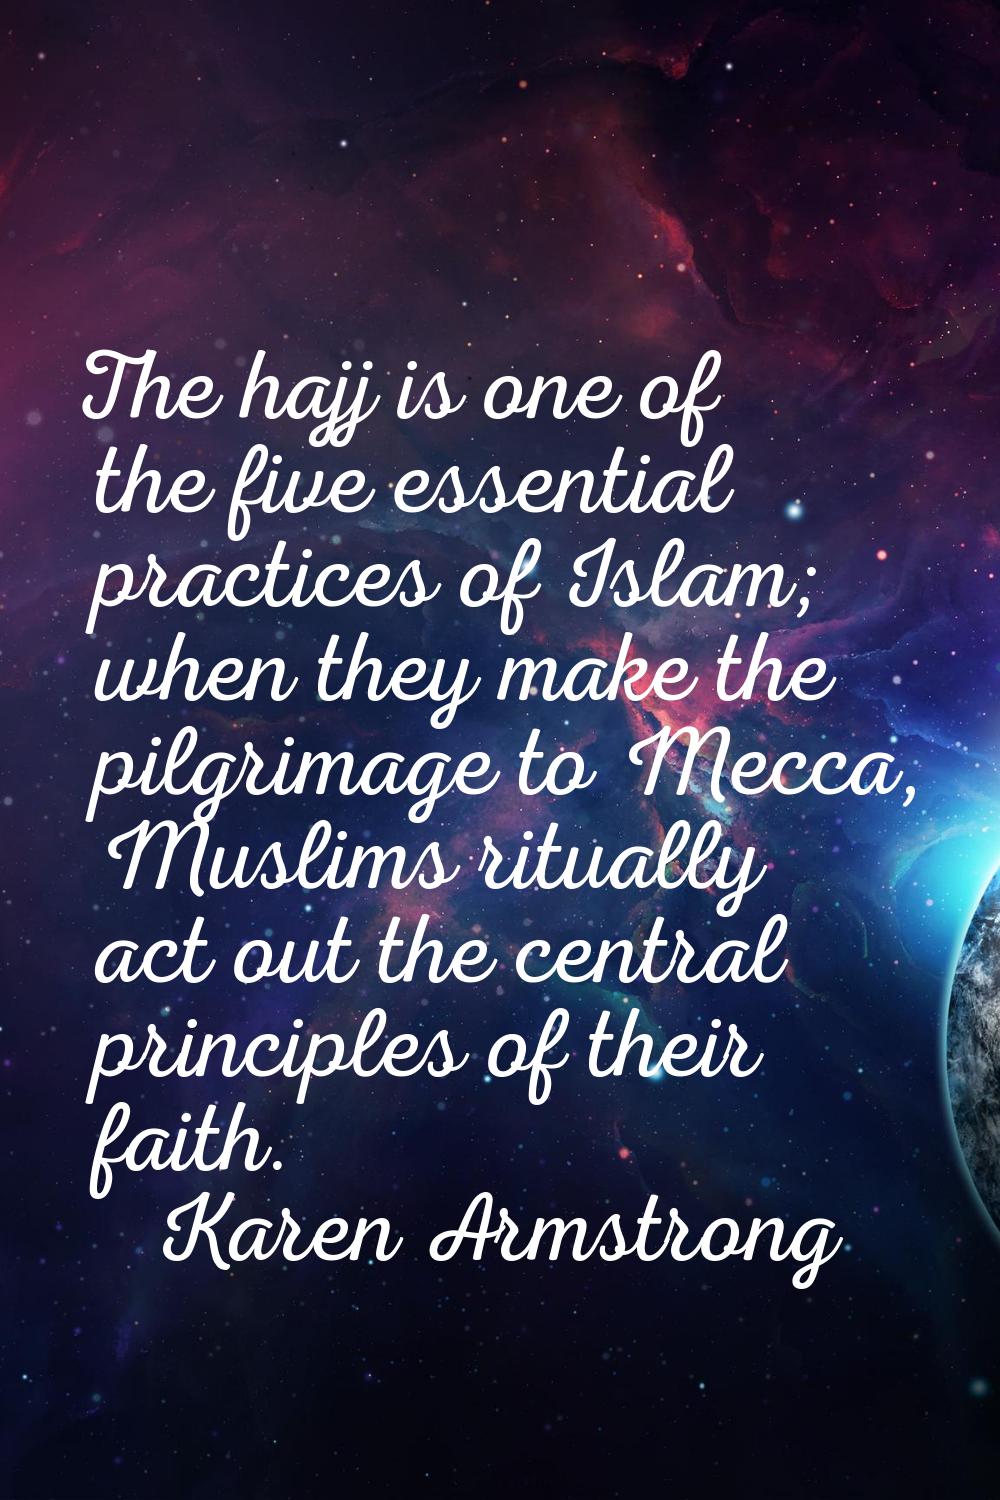 The hajj is one of the five essential practices of Islam; when they make the pilgrimage to Mecca, M